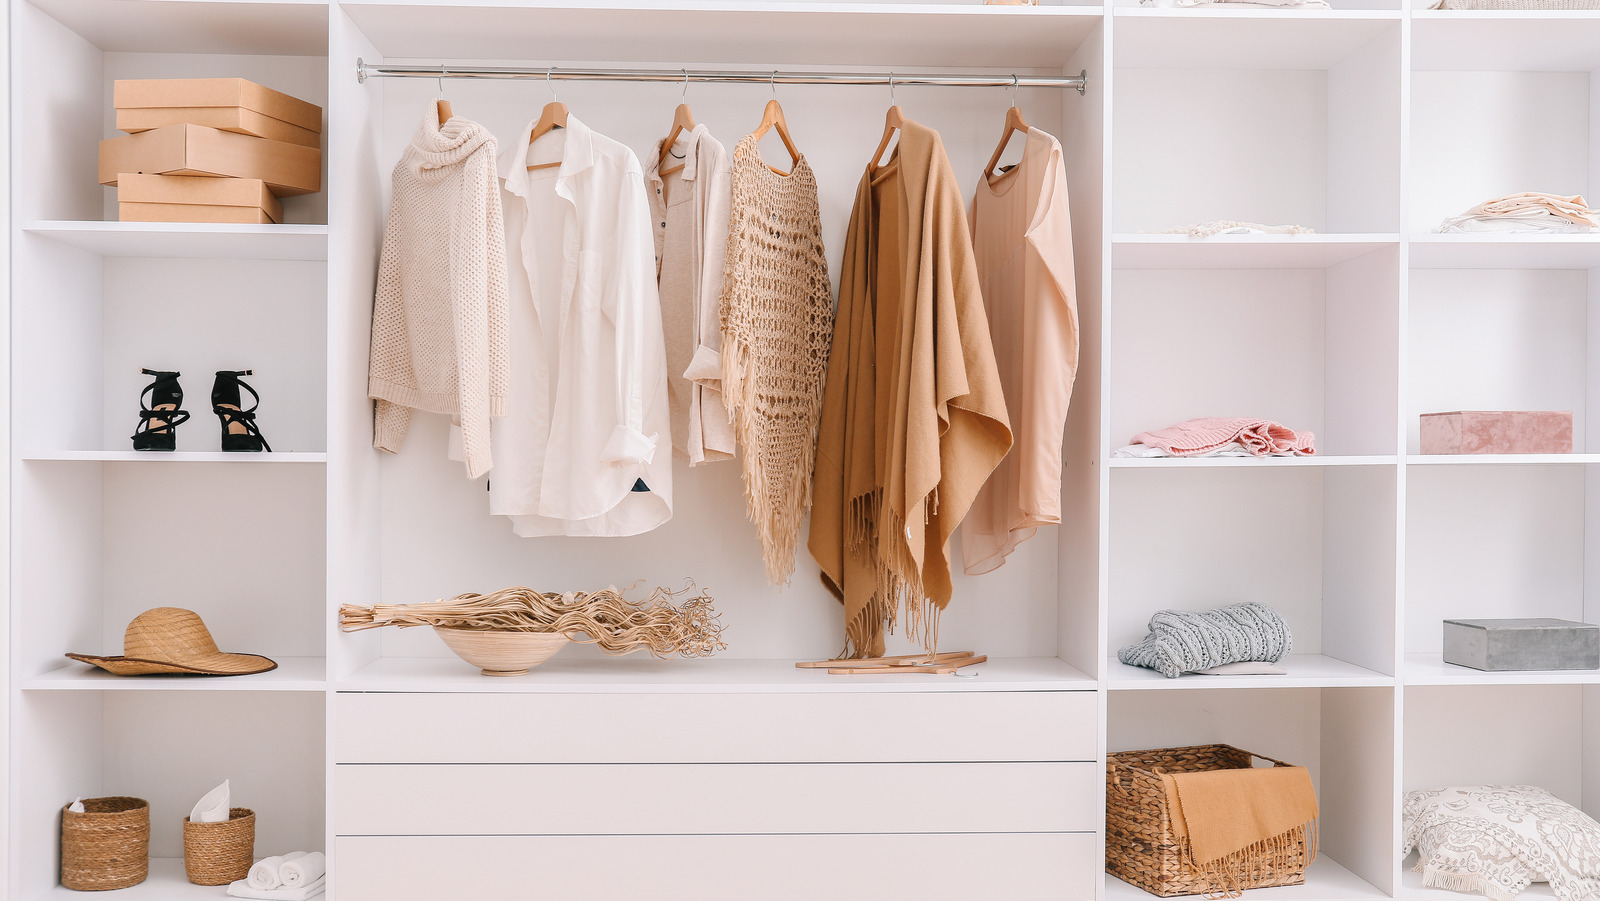 https://www.housedigest.com/img/gallery/20-ways-to-give-your-closet-doors-a-decorative-update/l-intro-1658154251.jpg